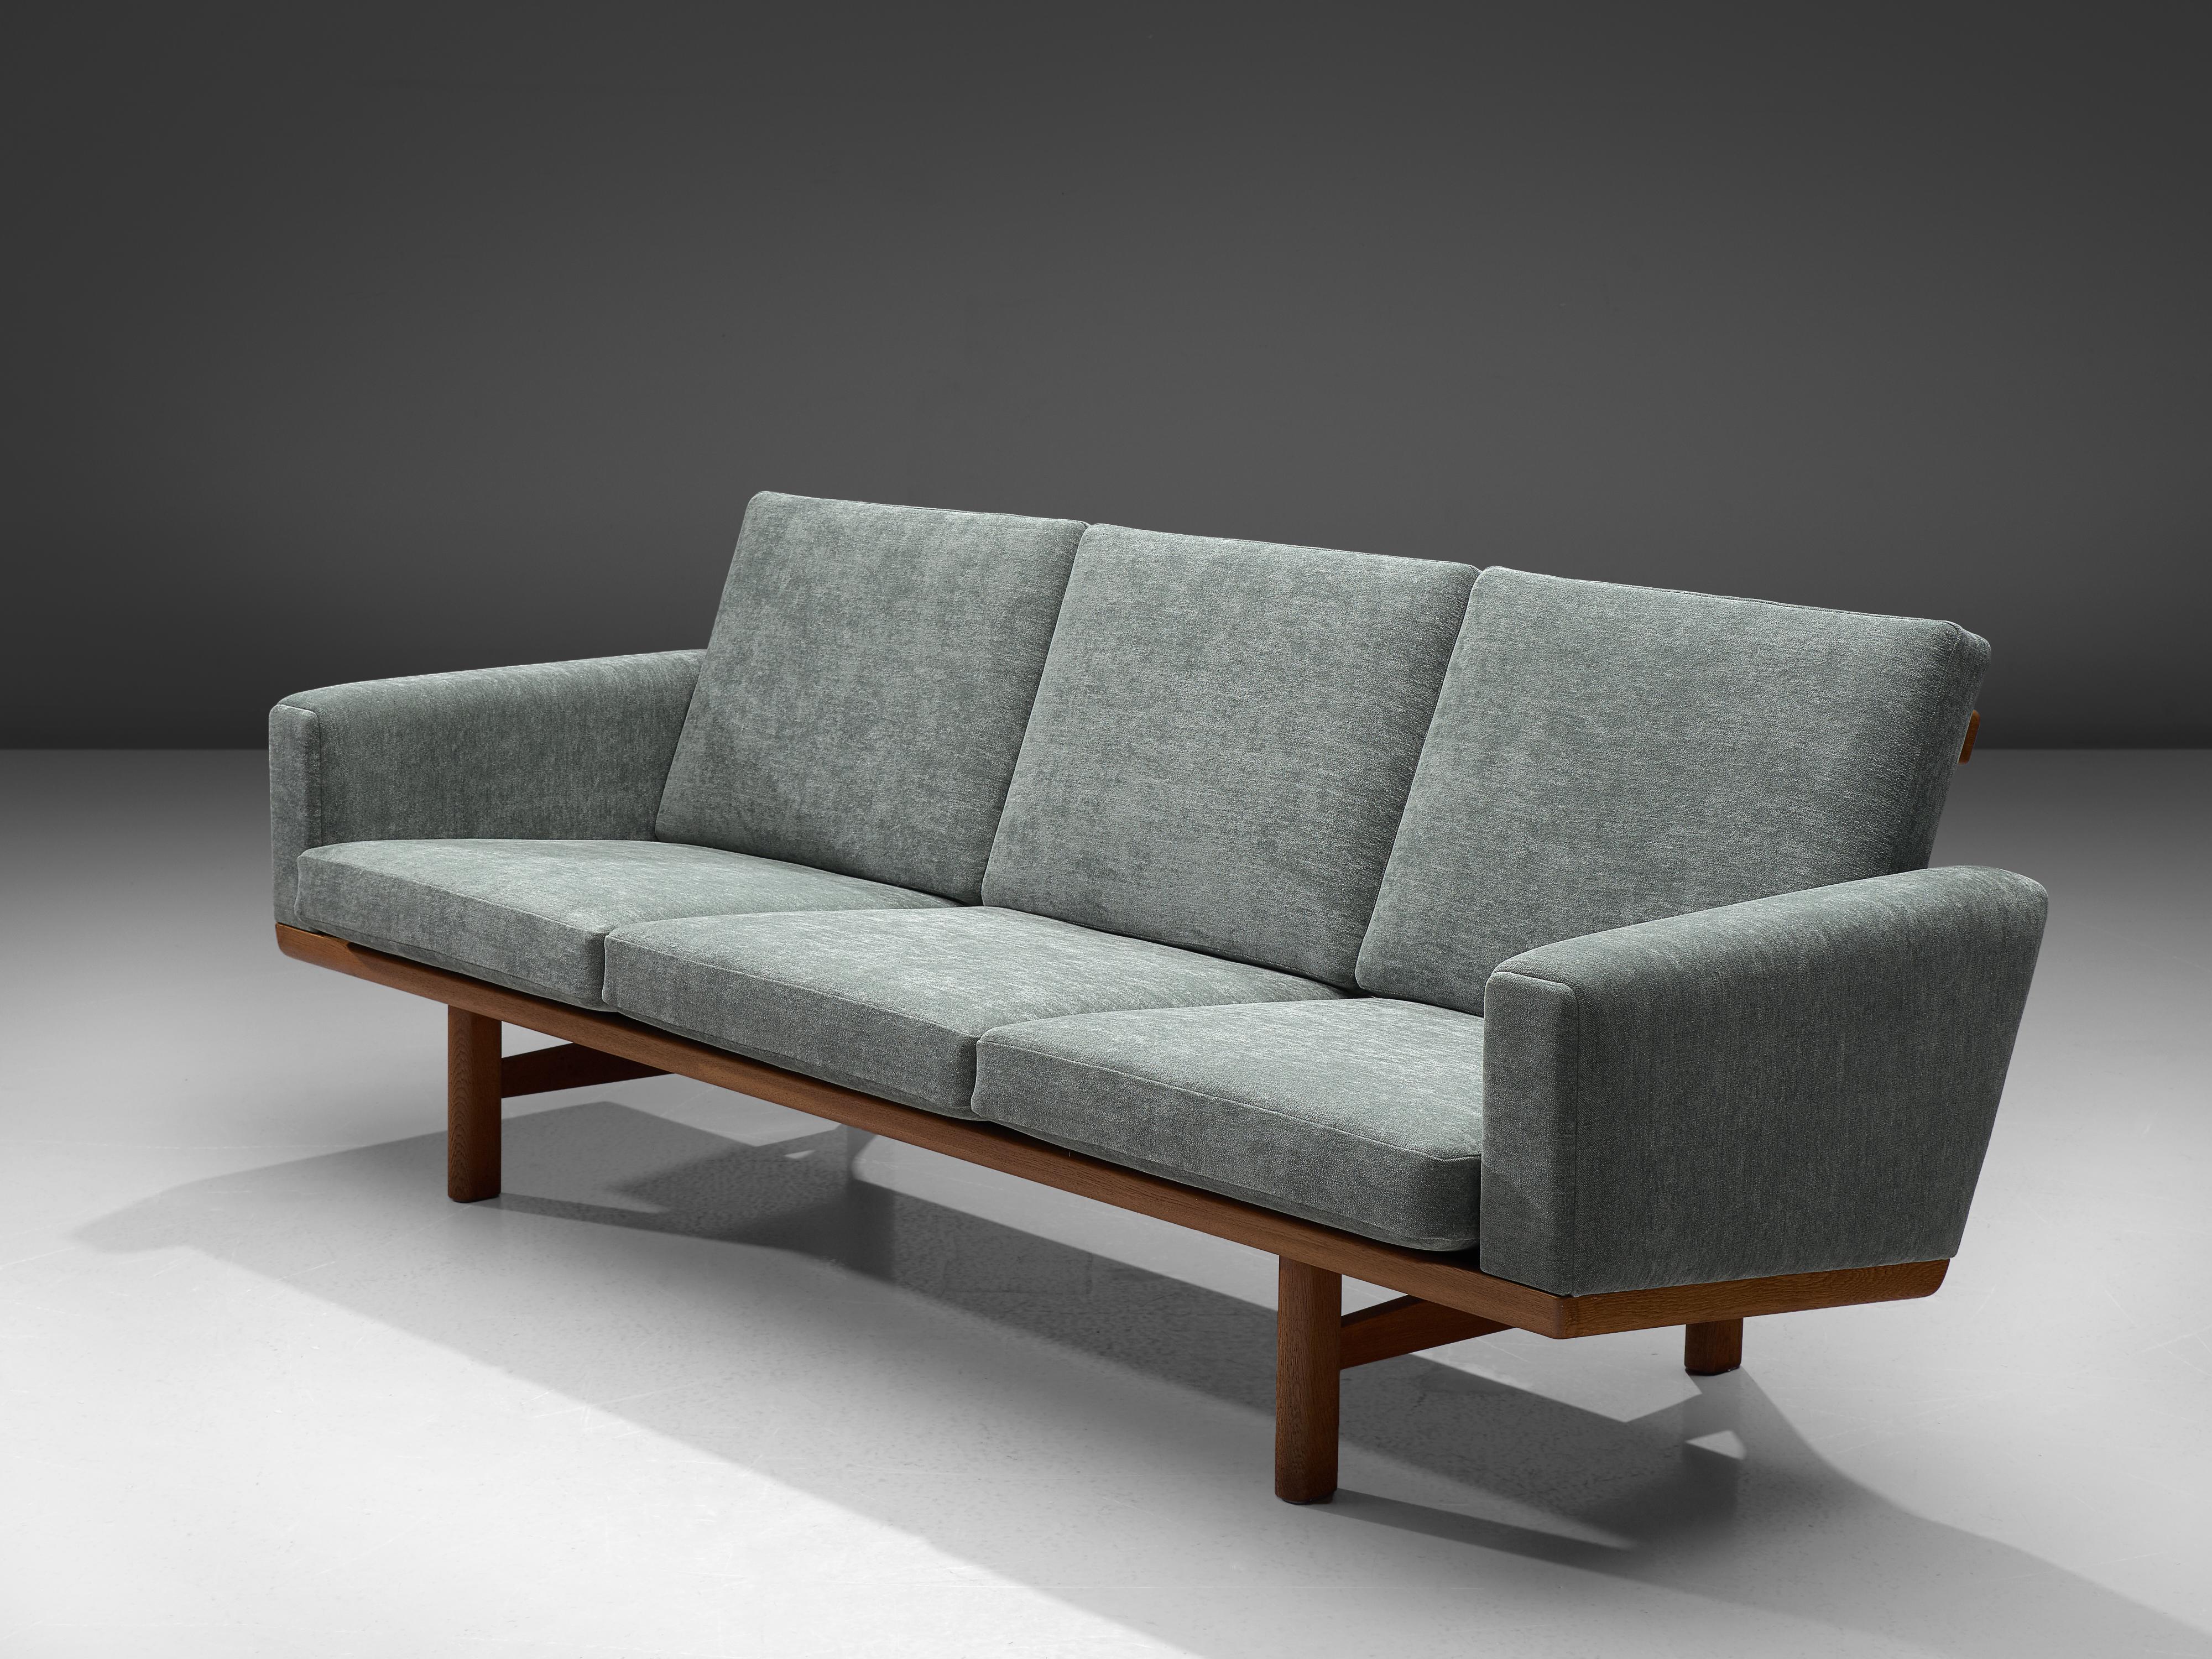 Hans J. Wegner, three-seat sofa model GE-236/3, fabric and oak, Denmark, 1950s

Beautiful sofa by Danish designer Hans J. Wegner. The sofa has been reupholstered in our in-house atelier with a high quality Dedar fabric. This sofa has a solid oak